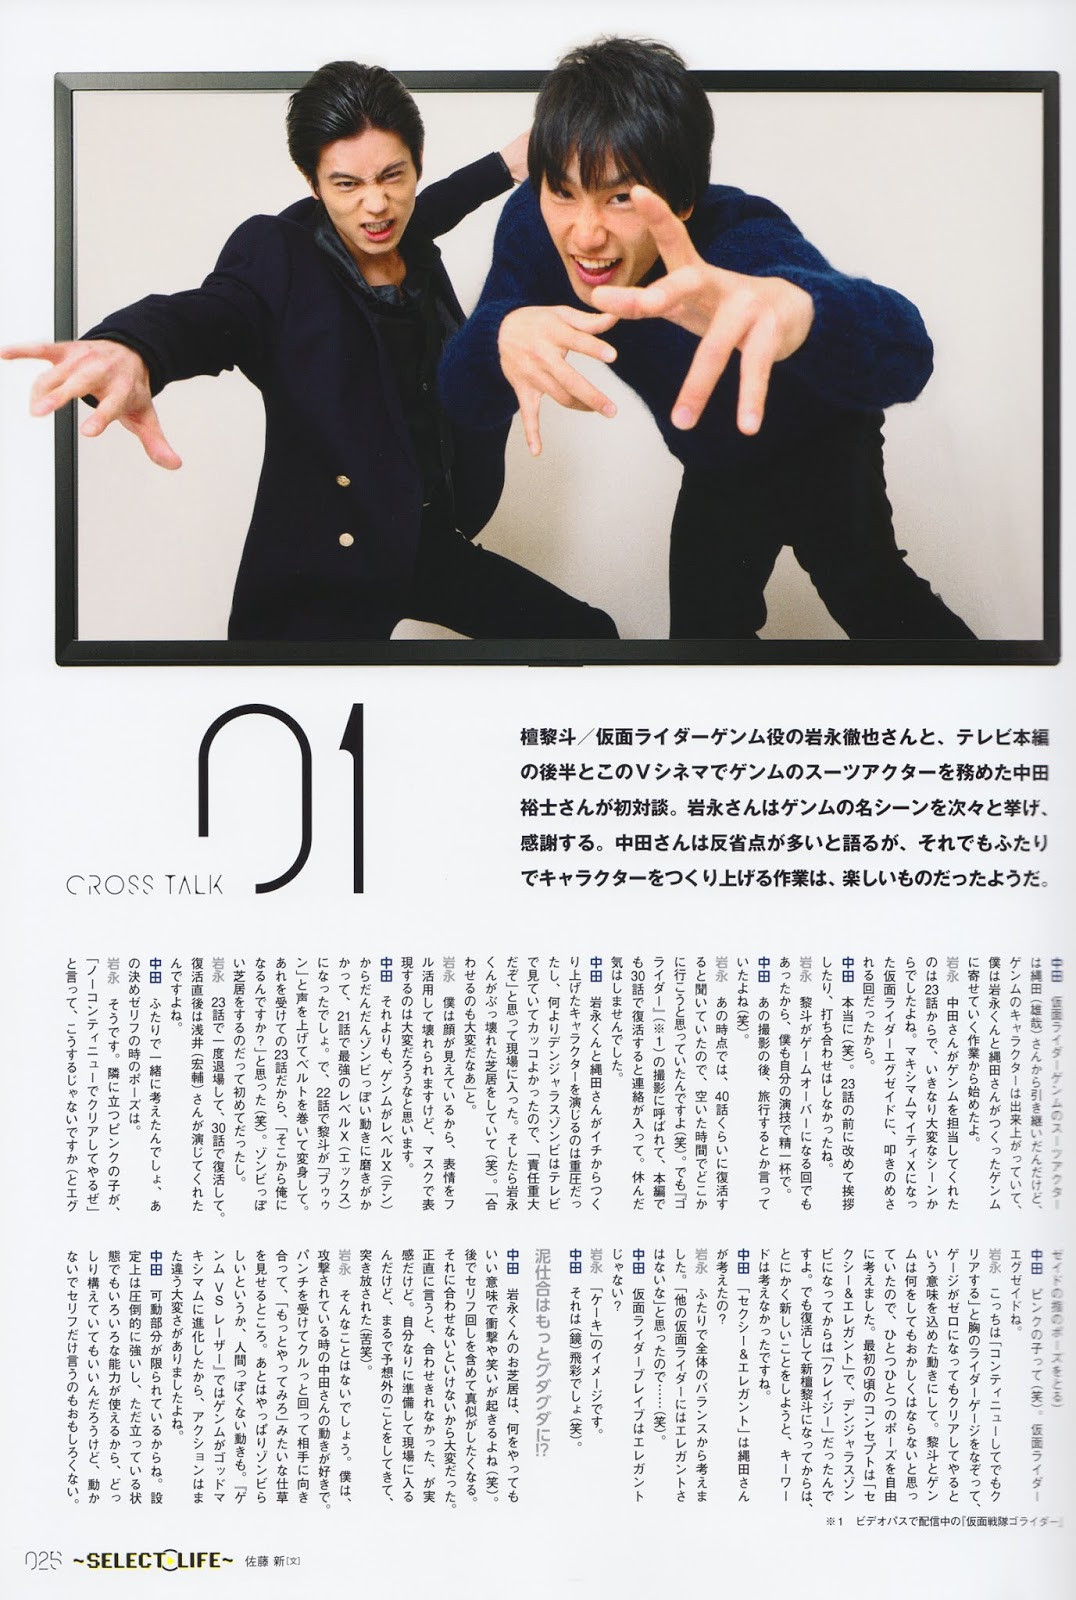 Scanned page of original interview with photograph of Iwanaga Tetsuya and Nakata Yuji side by side posing like Dangerous Zombie.